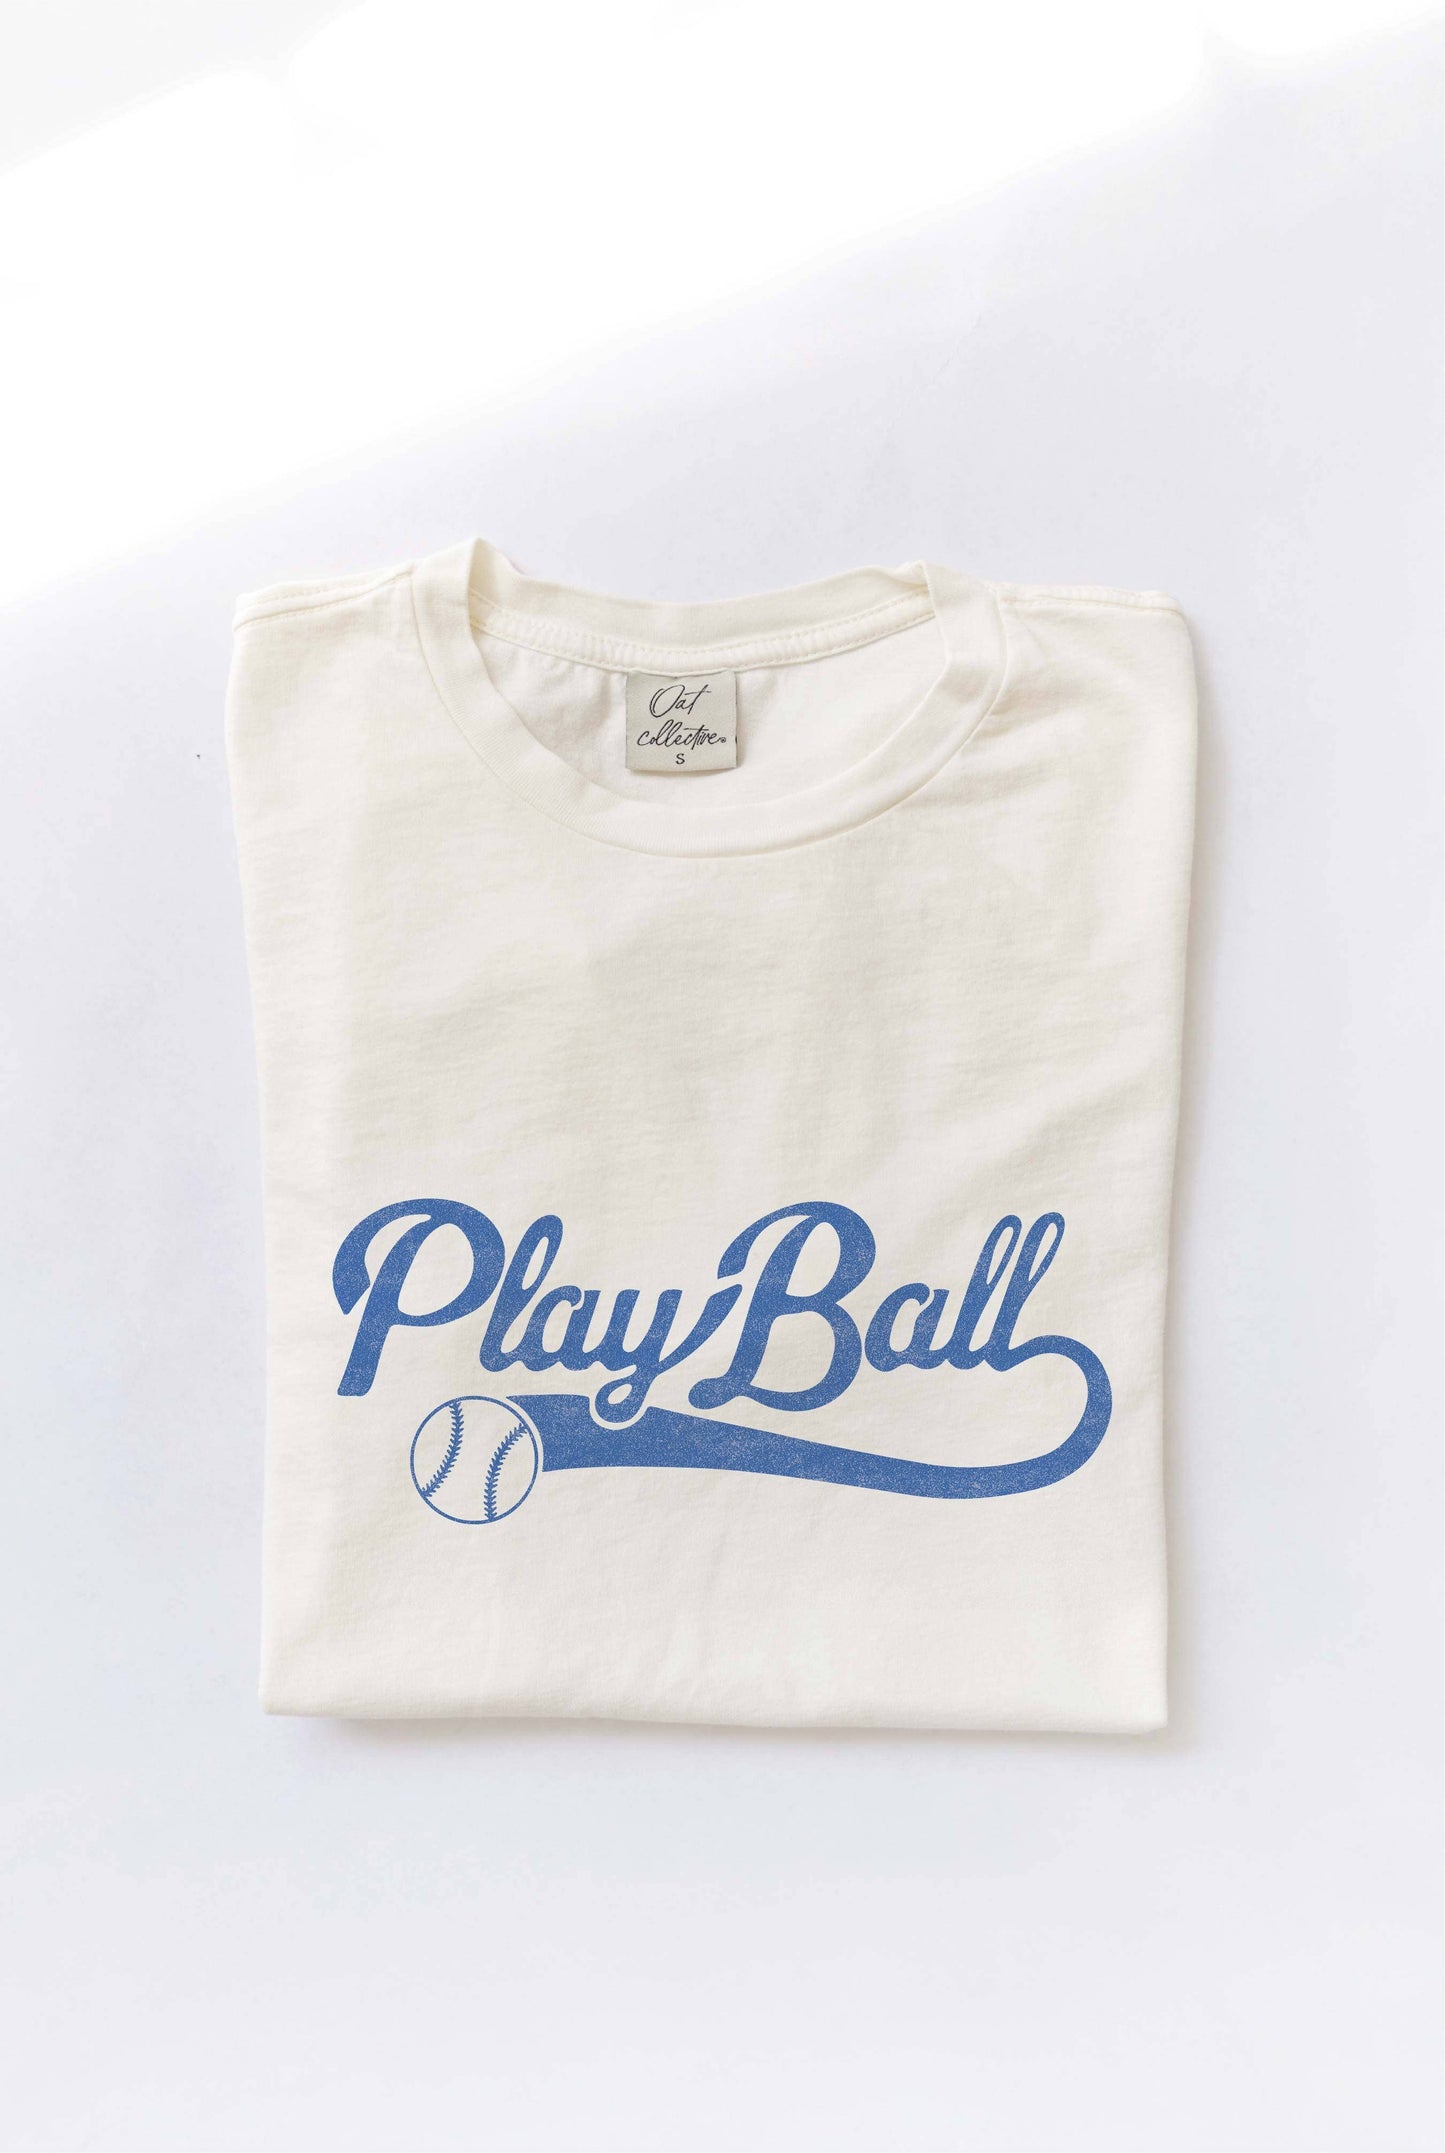 Playball! Mineral Washed Graphic Top by Oat Collective